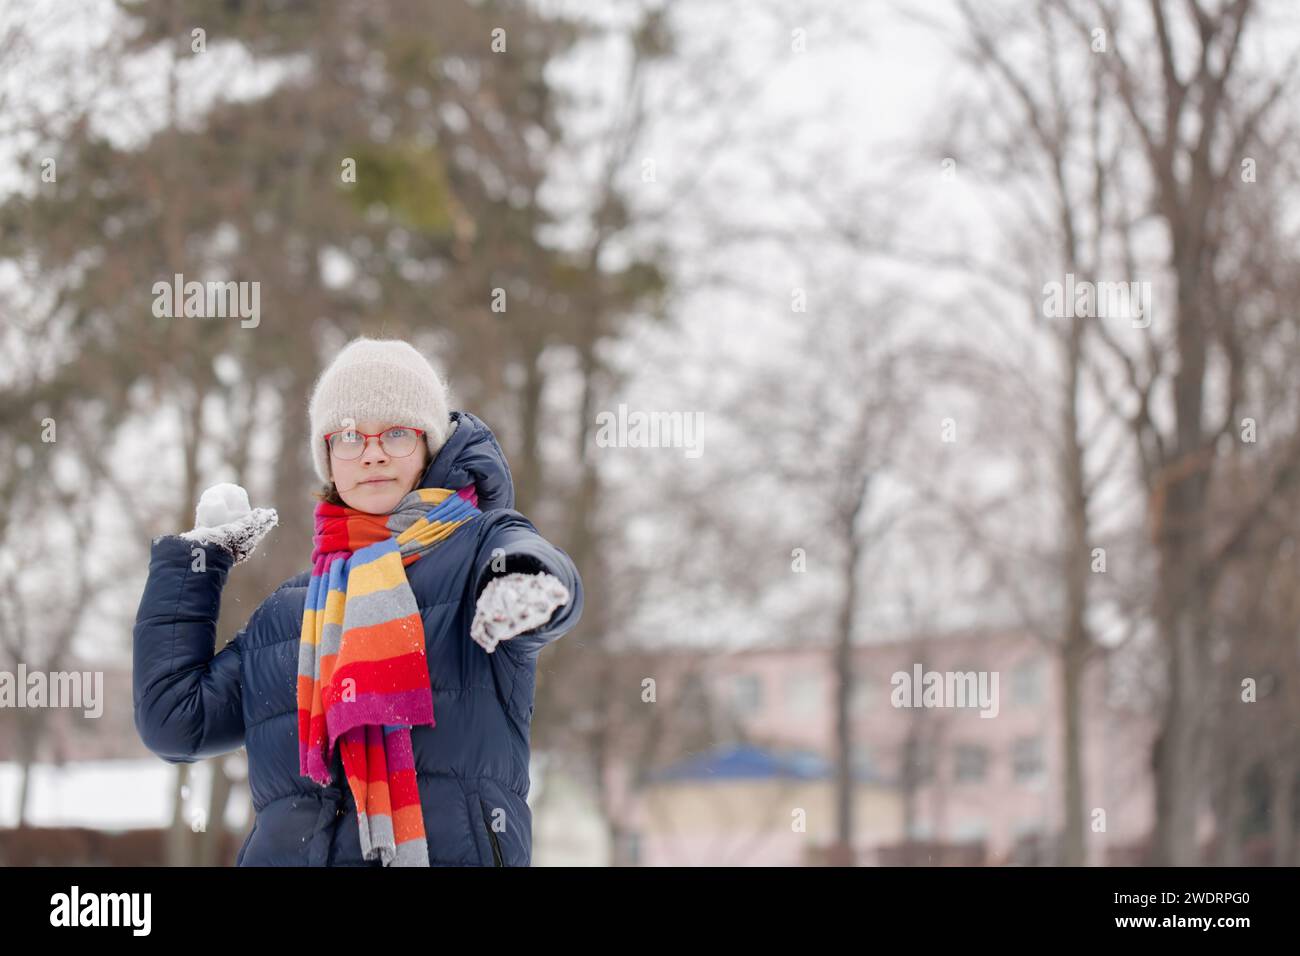 A teenage girl plays with snowballs in a winter park Stock Photo